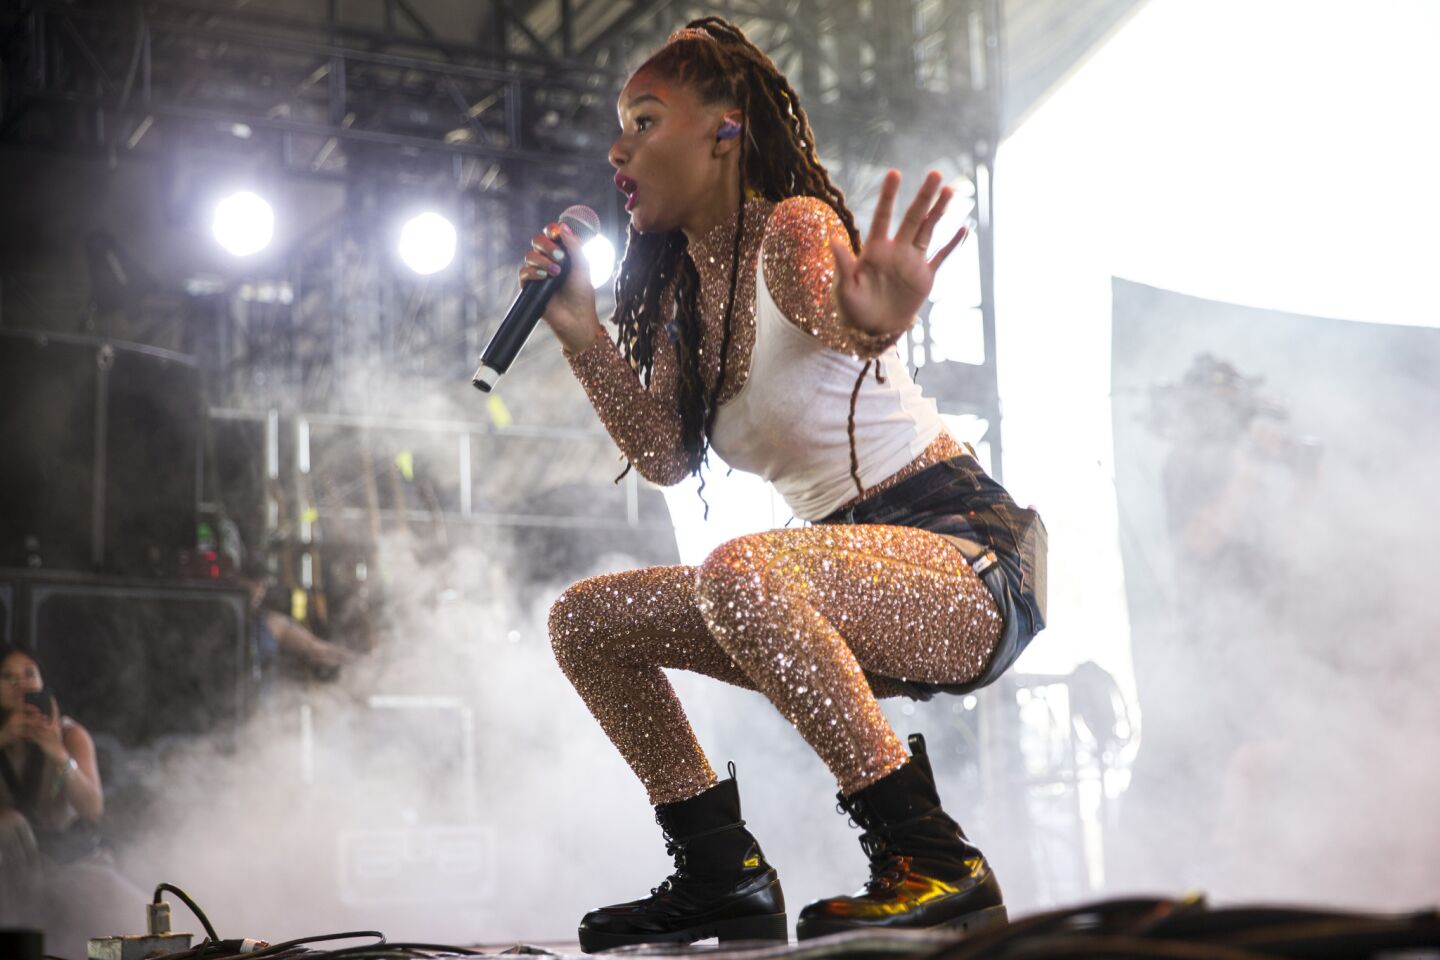 Musician Chloe Bailey of Chloe x Halle performs during Day 2 of the Coachella Valley Arts and Music Festival on April 14.